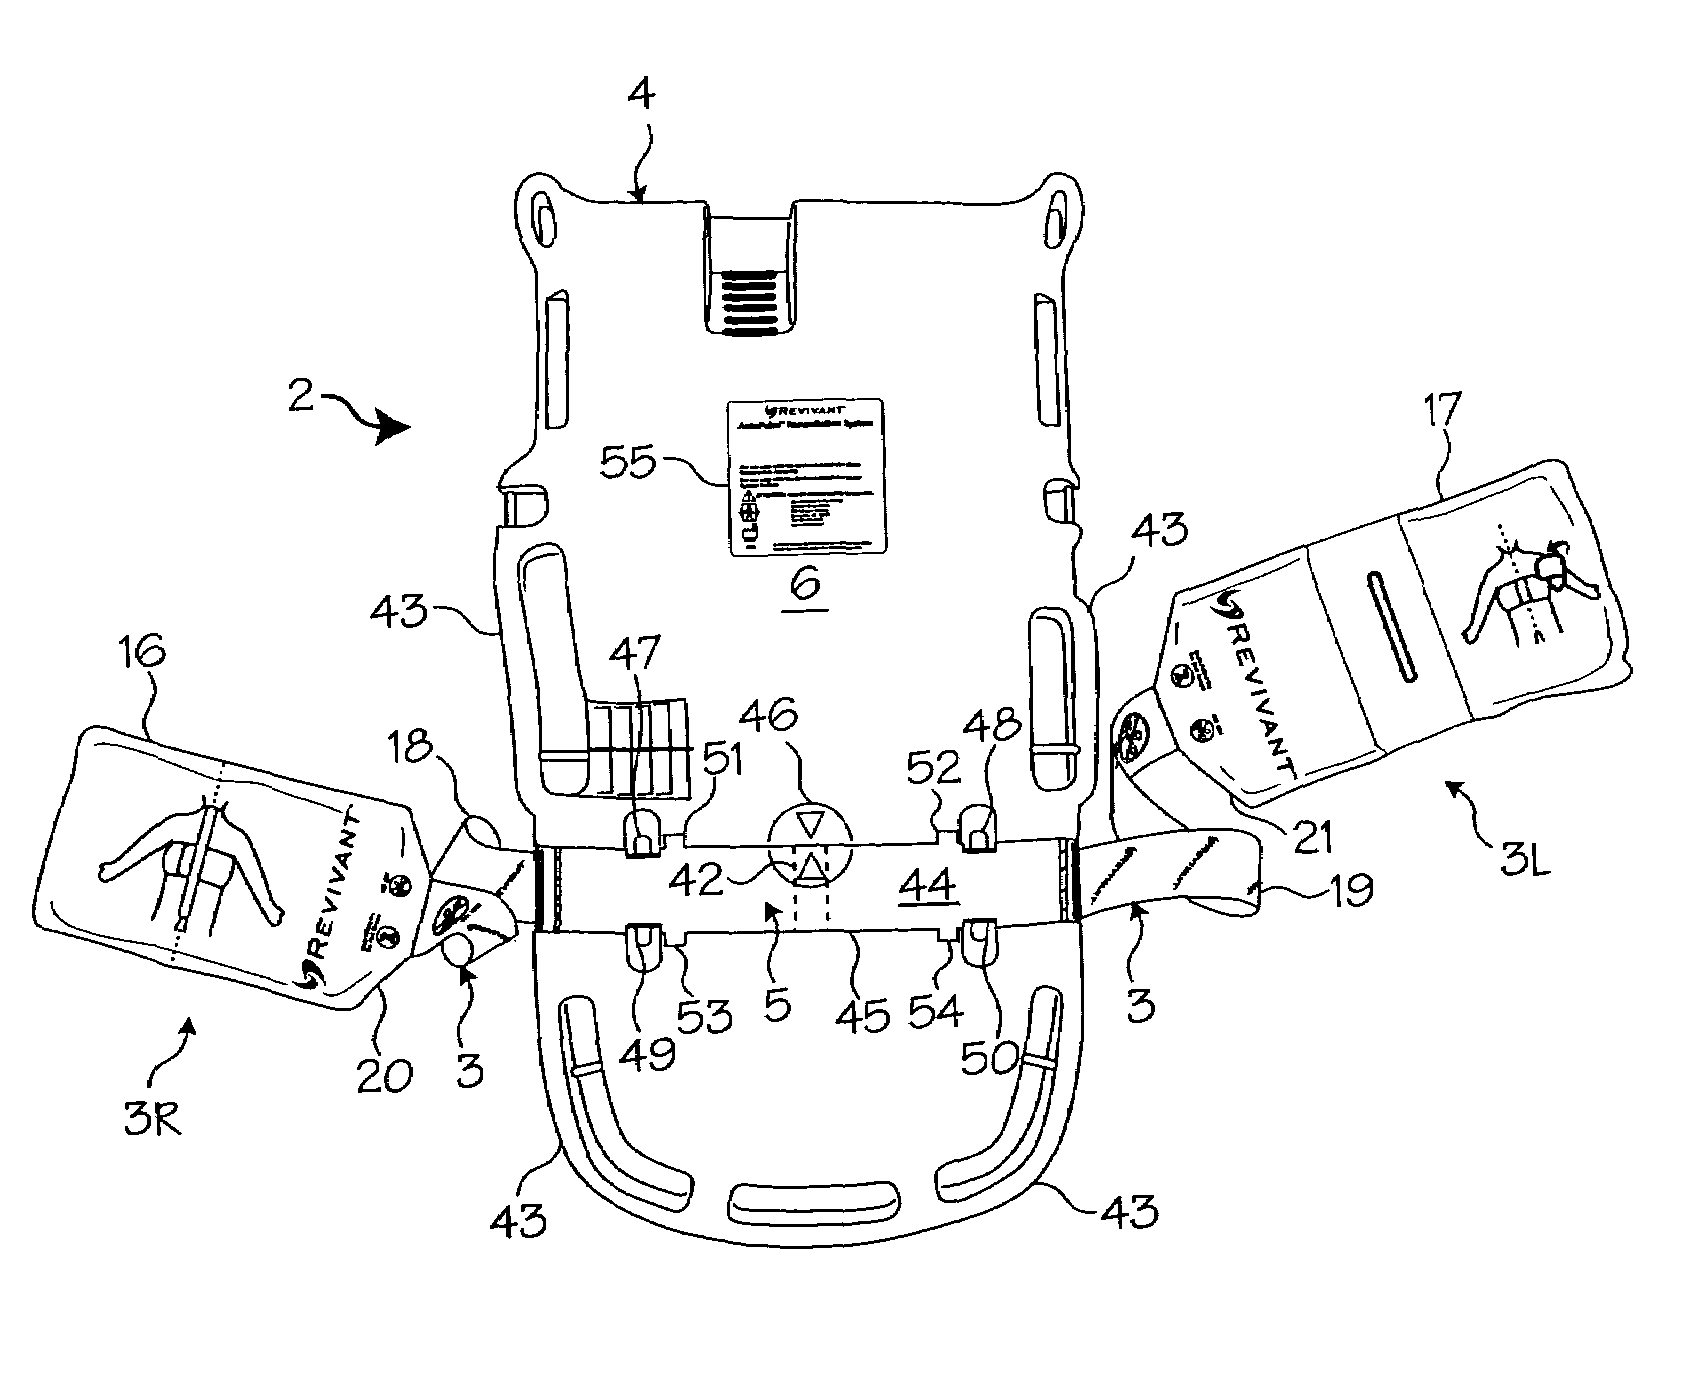 Methods and devices for attaching a belt cartridge to a chest compression device